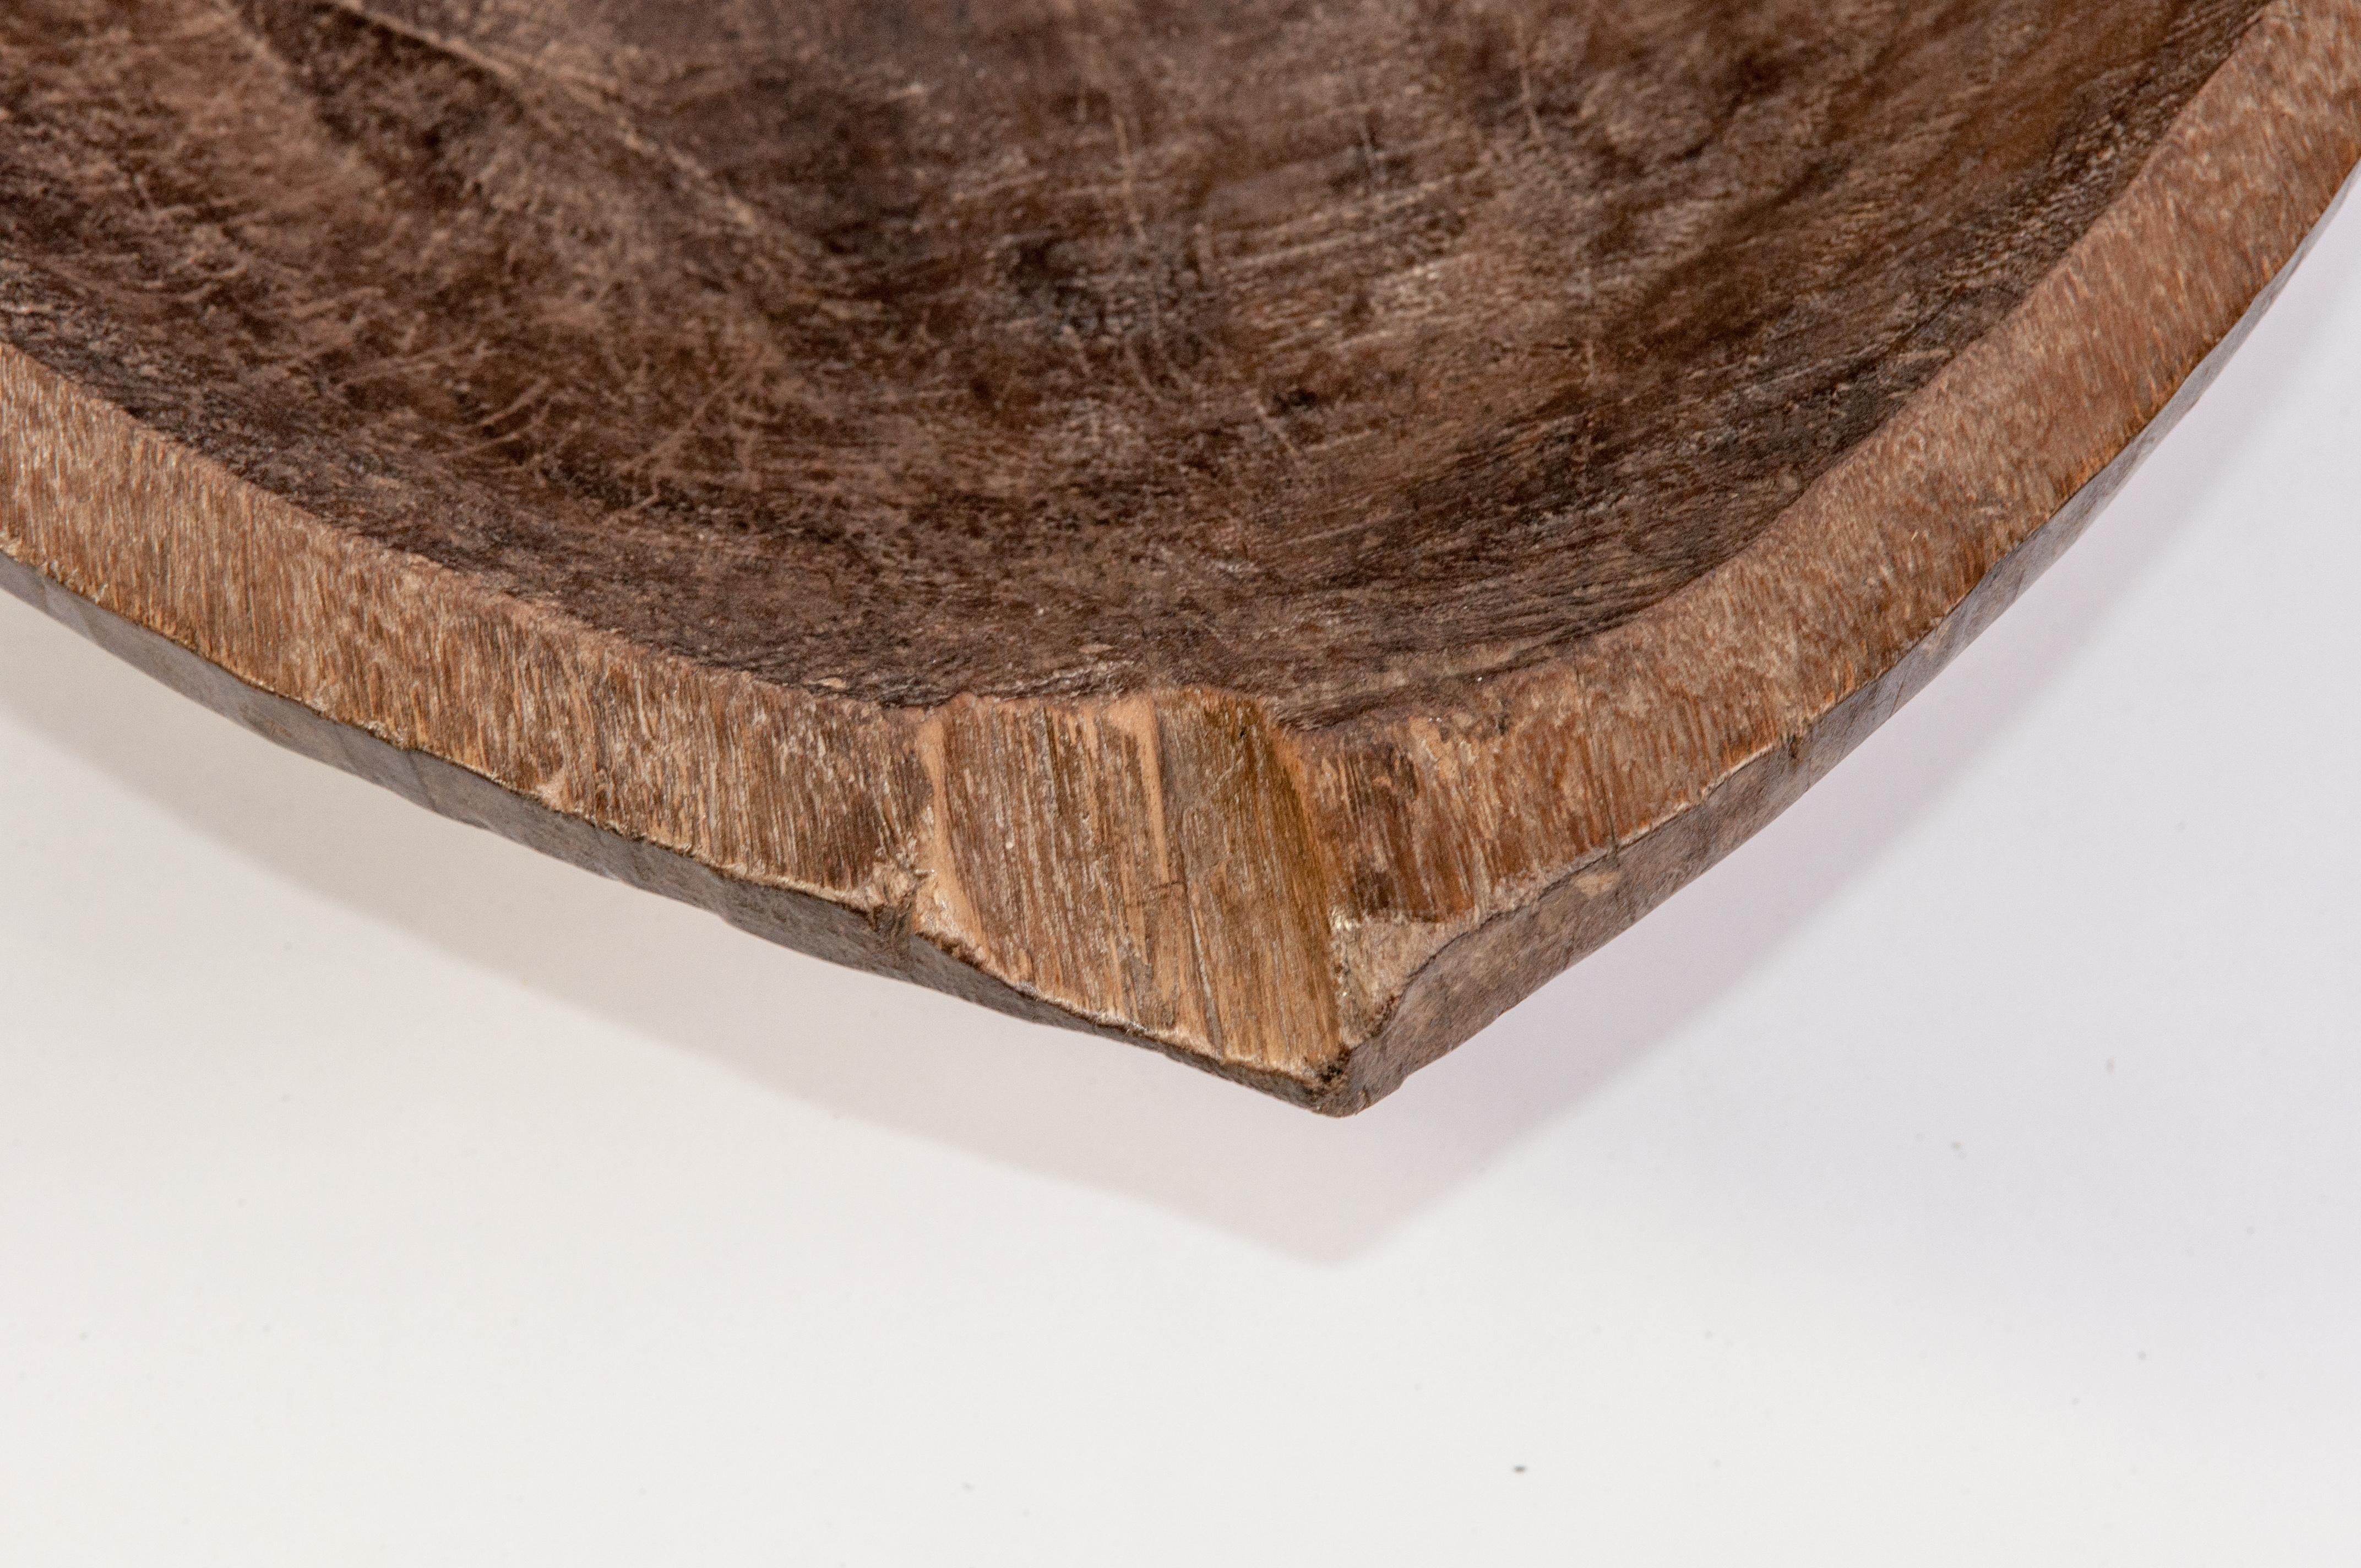 Tribal Hand Hewn Wooden Tray, Bowl, Mentawai Islands, Early to Mid-20th Century 9